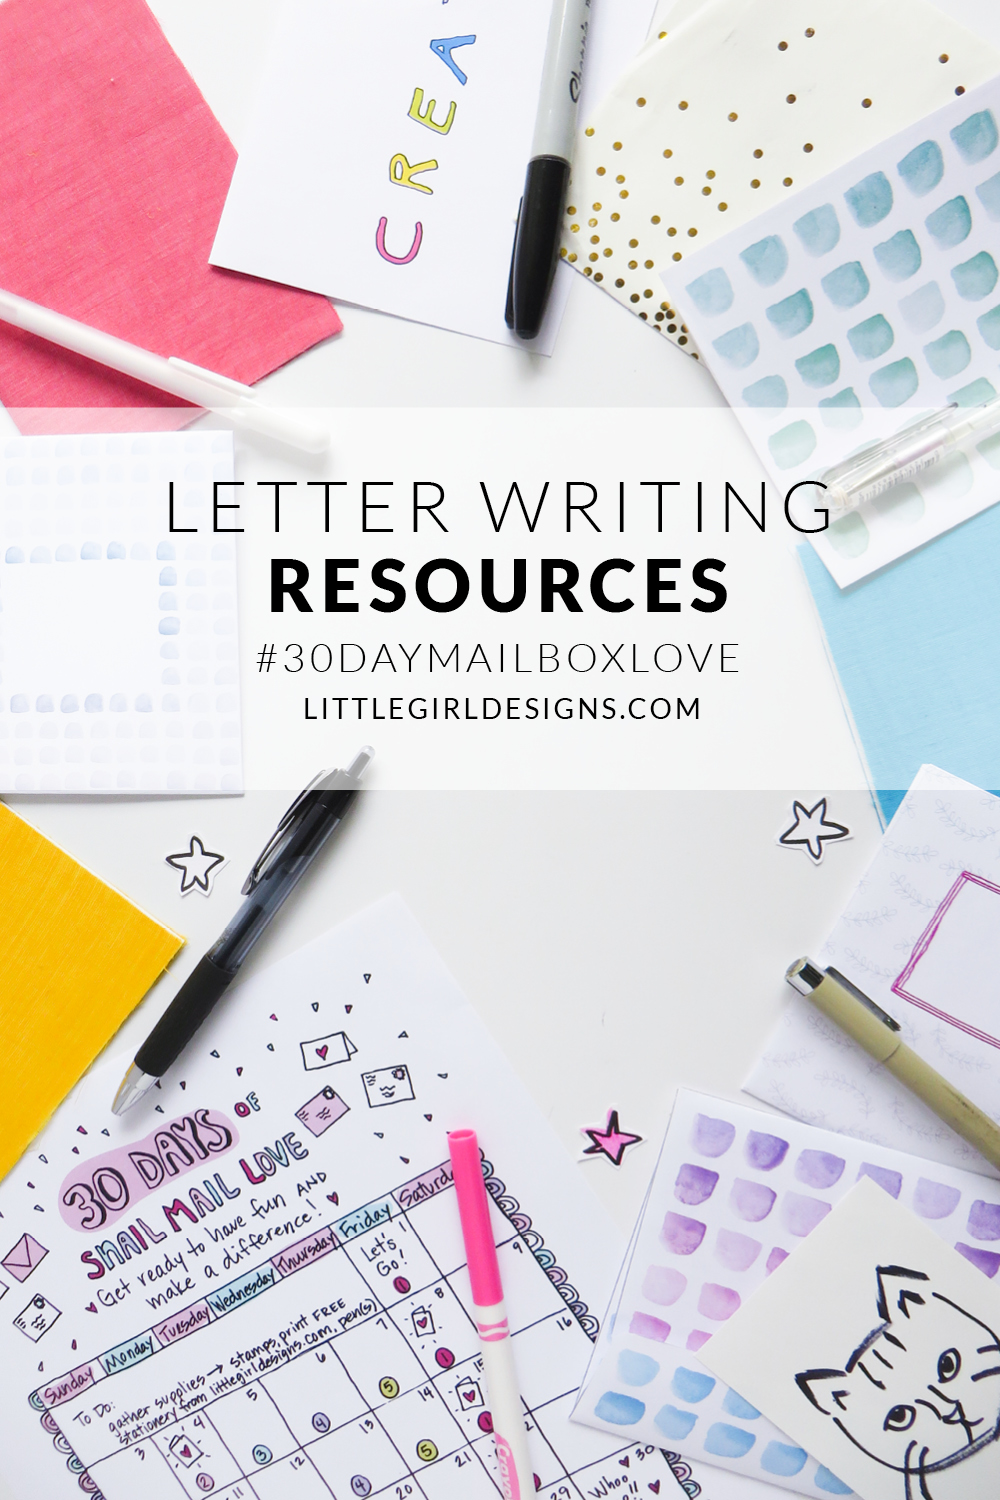 Looking for some fun letter-writing resources? I'm sharing several of my favorites today as I'm kicking off a month of #snailmail posts on the blog. Come see if your favorites made the list!